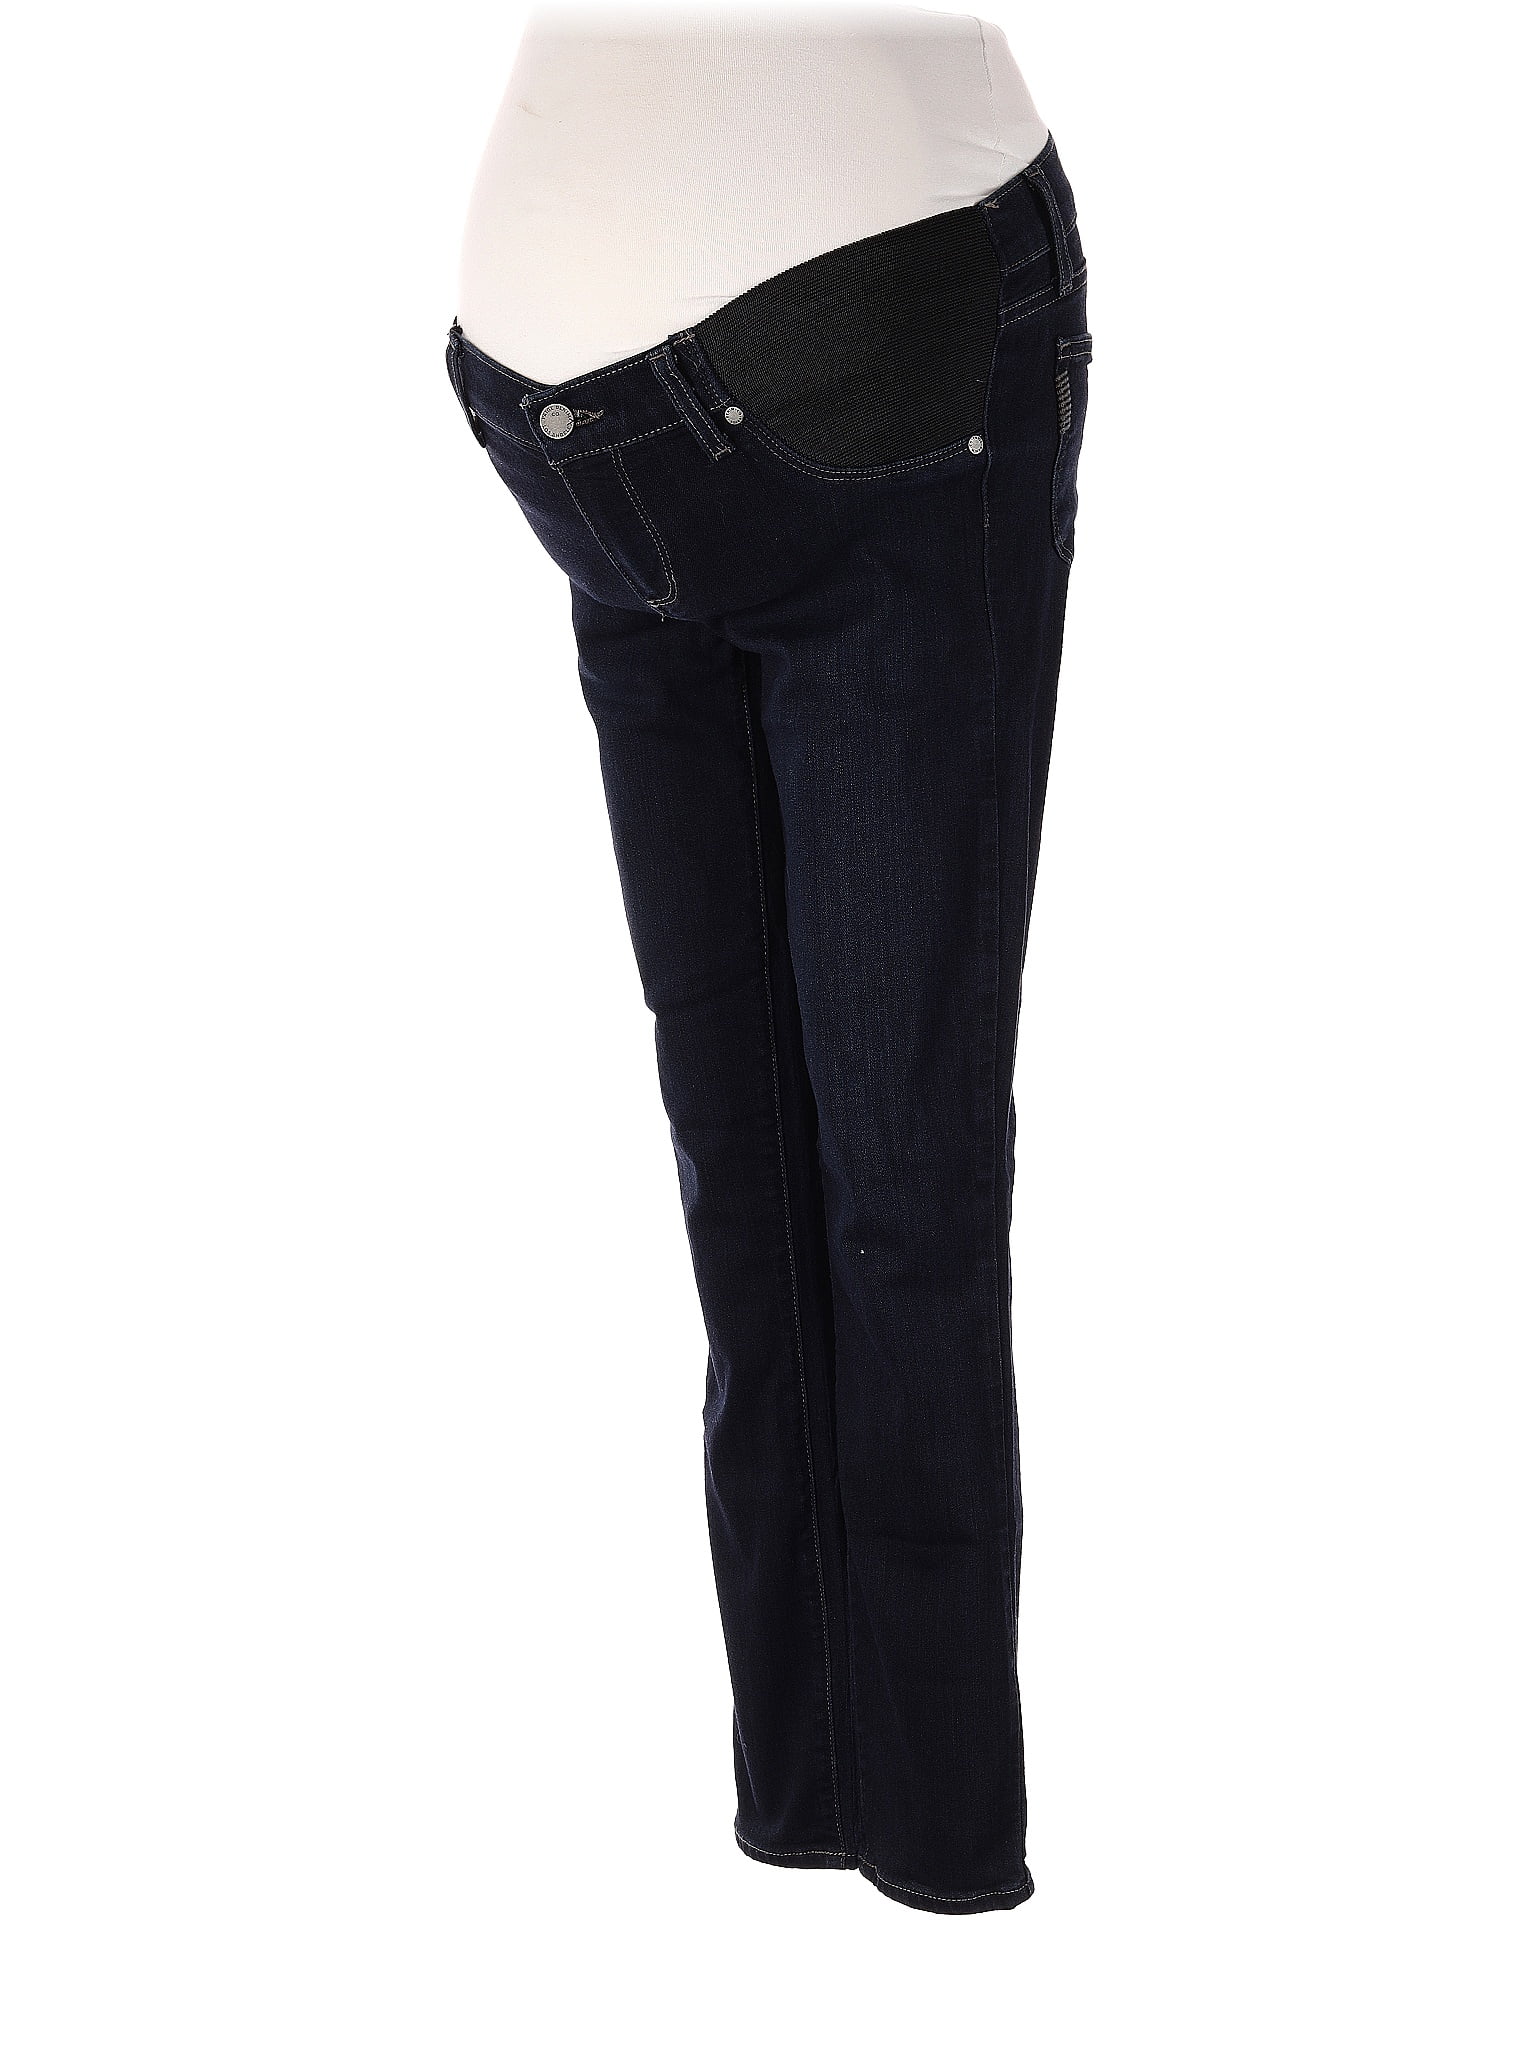 Forest Green Paige Premium Denim Maternity Straight Cut Pants (Gently Used  - Size 25) - Motherhood Closet - Maternity Consignment